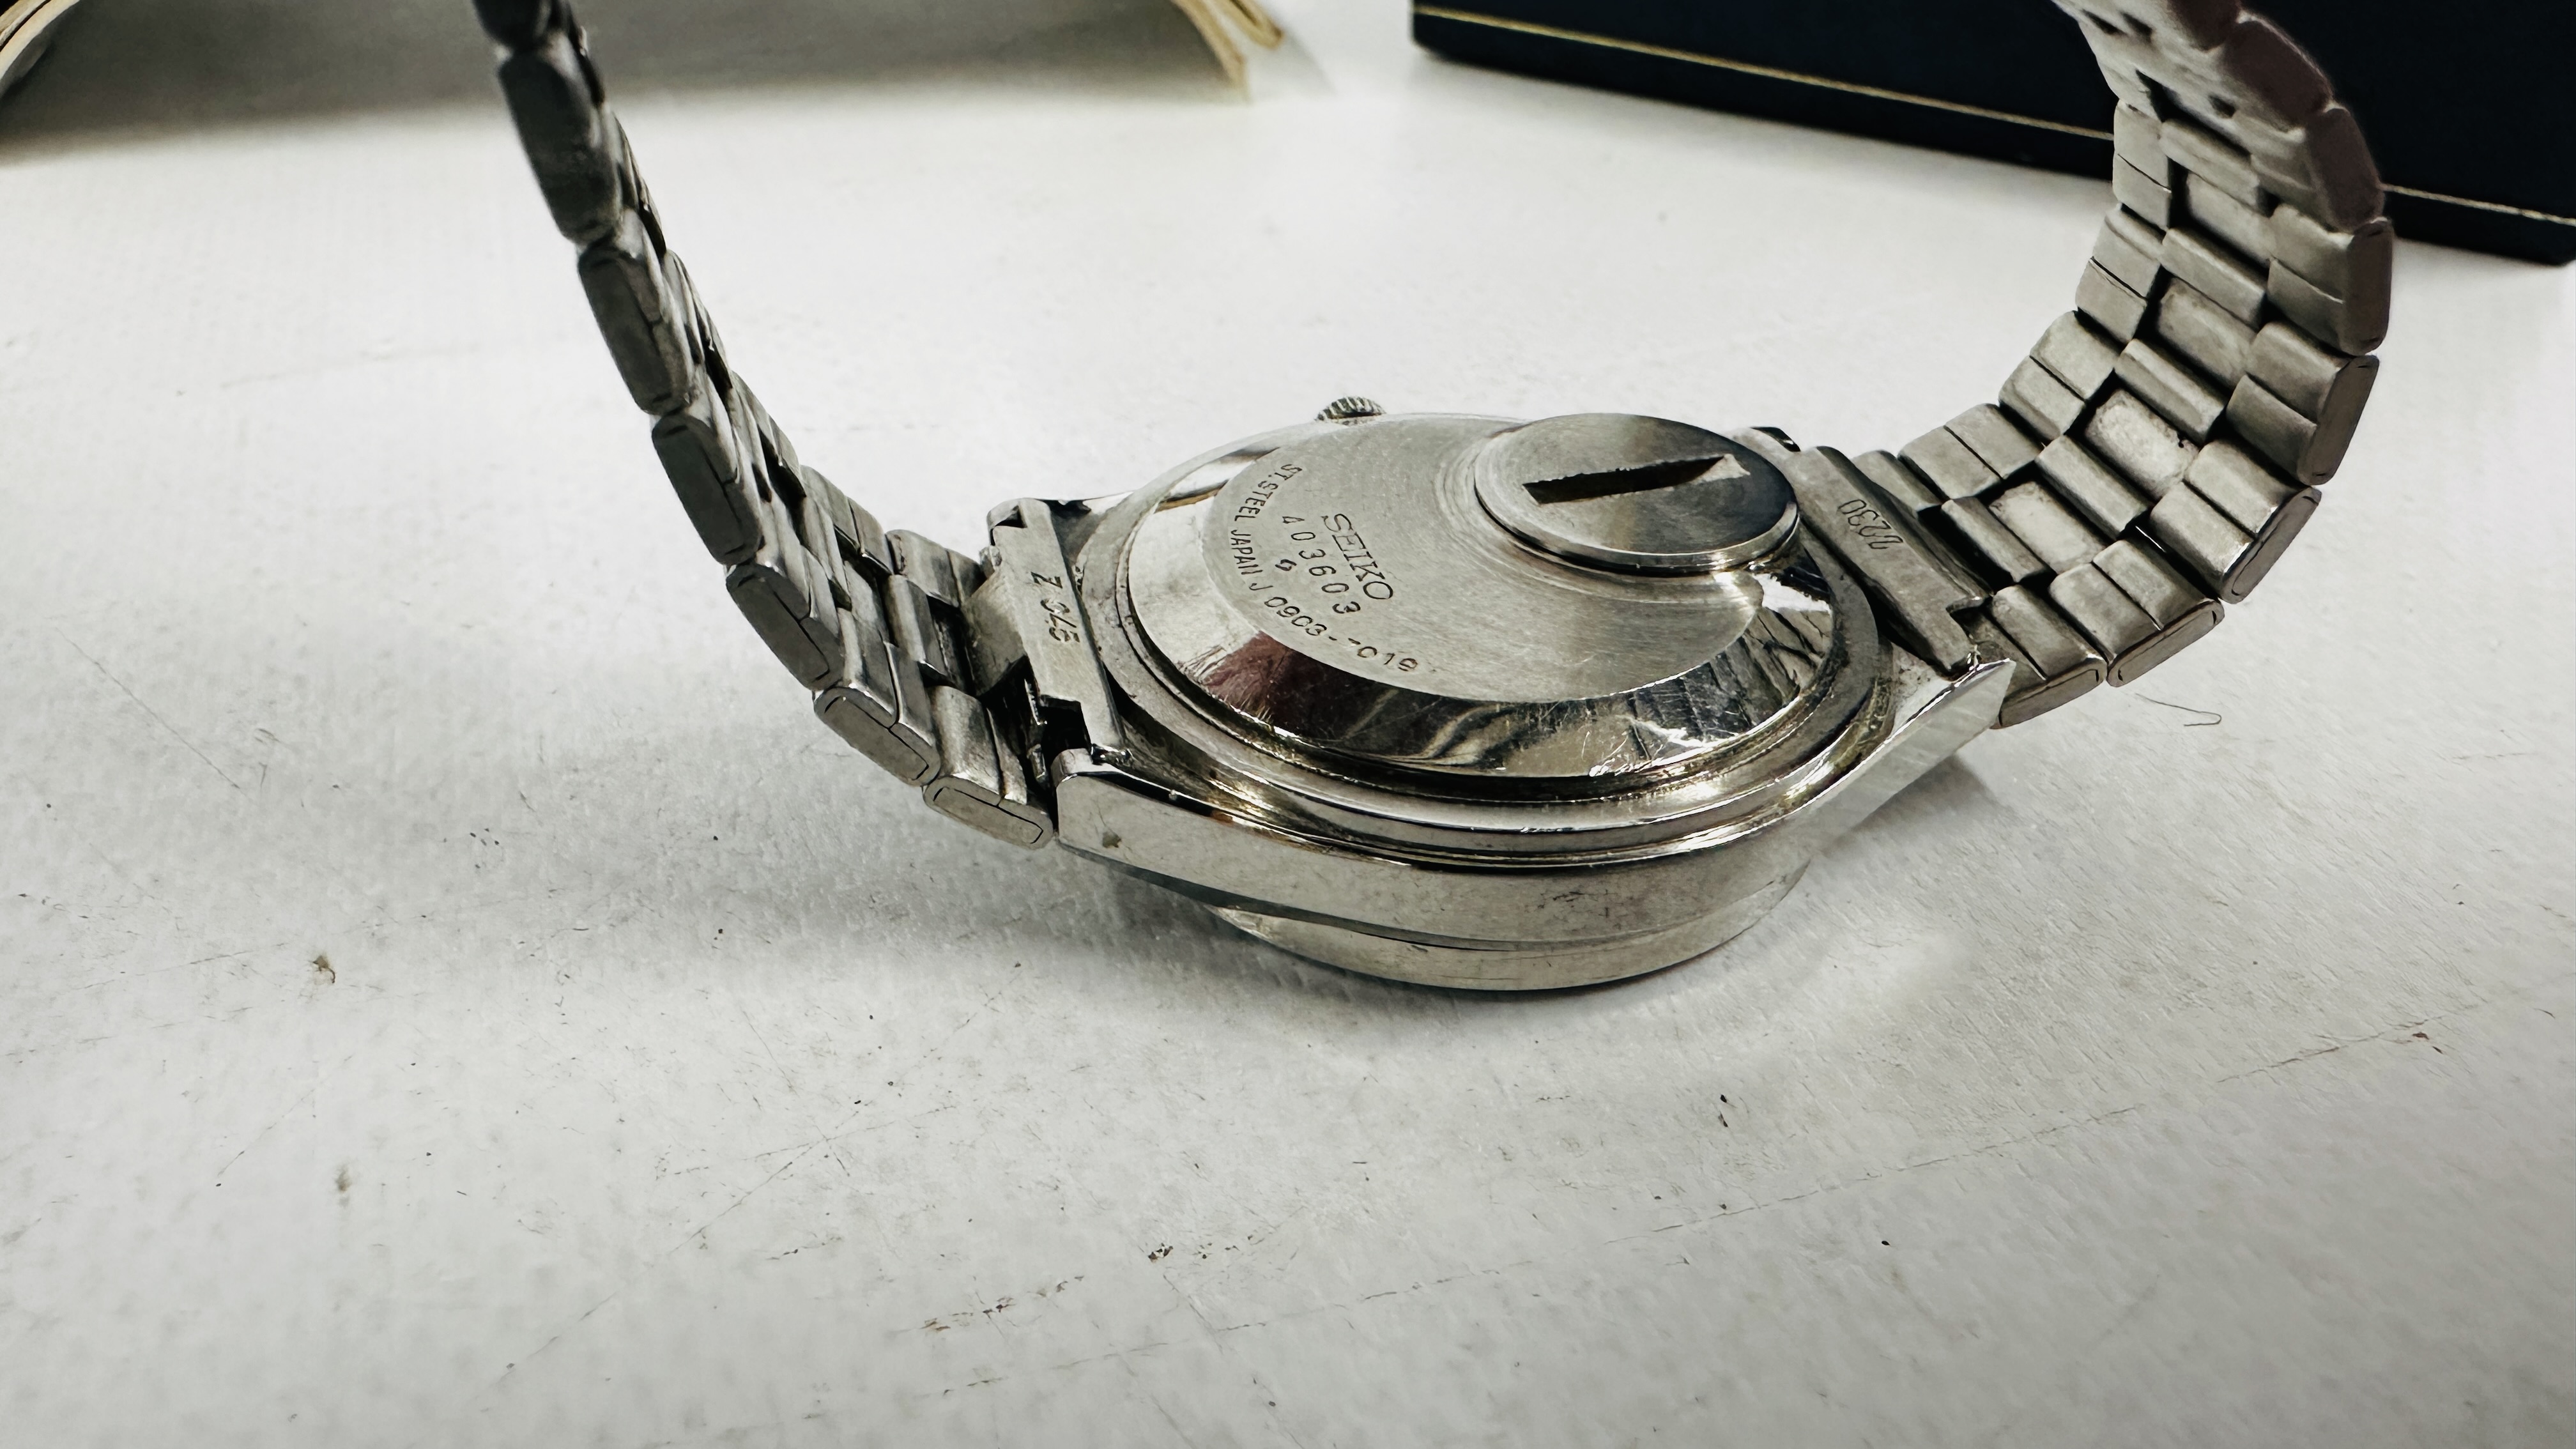 A GENT'S SEIKO STAINLESS STEEL BRACELET WRIST WATCH BOXED WITH INSTRUCTIONS - 1977. - Image 7 of 8